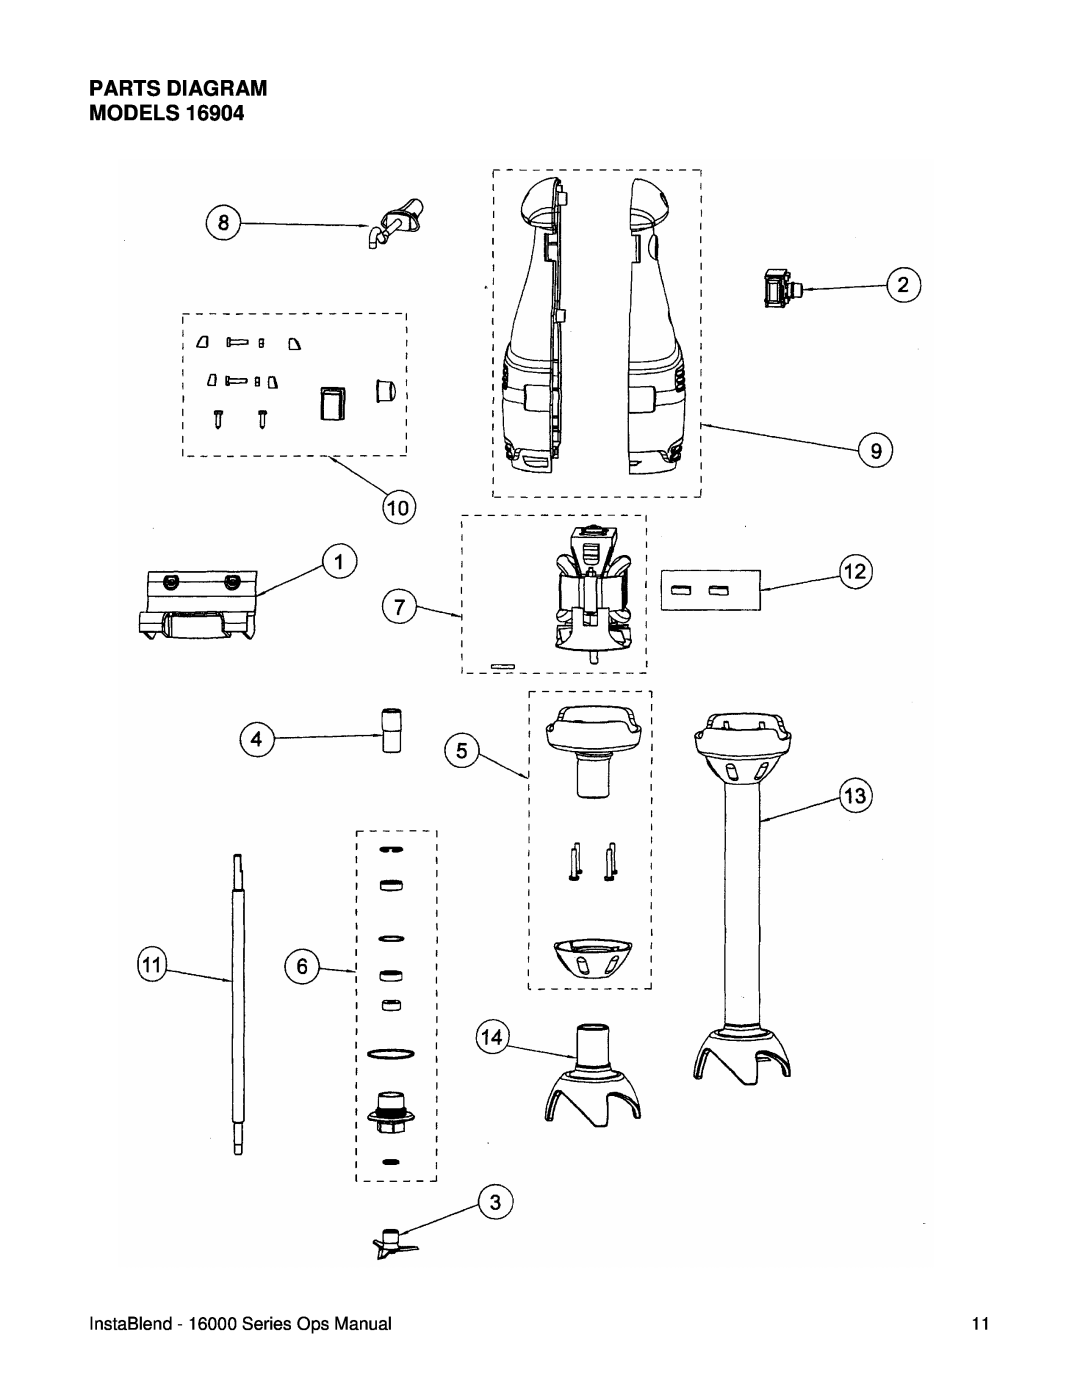 Lincoln 16900 operating instructions Parts Diagram Models, InstaBlend - 16000 Series Ops Manual 